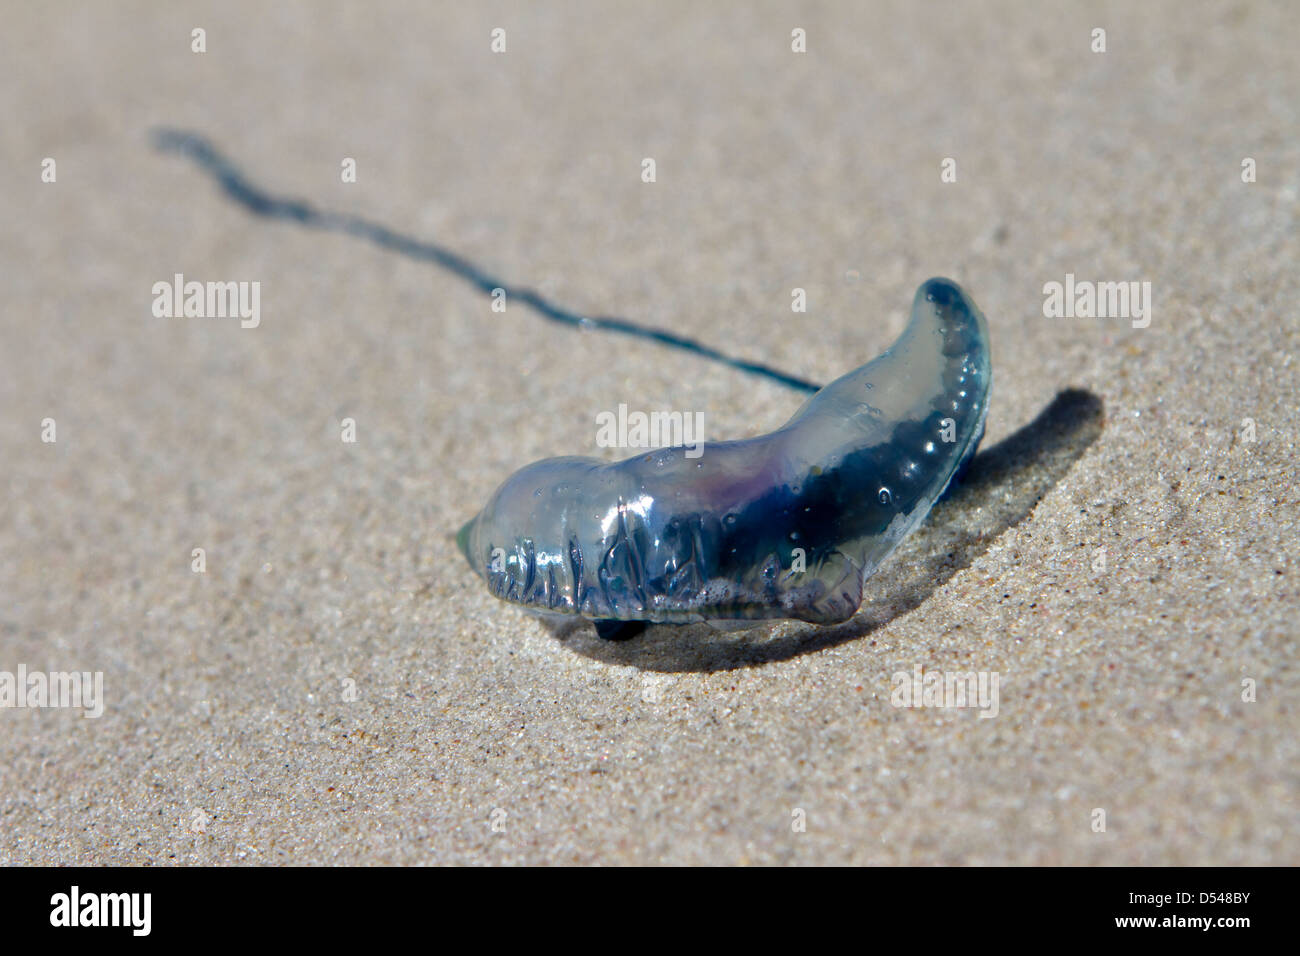 Portuguese Man O War jellyfish washed up on the beach. Stock Photo